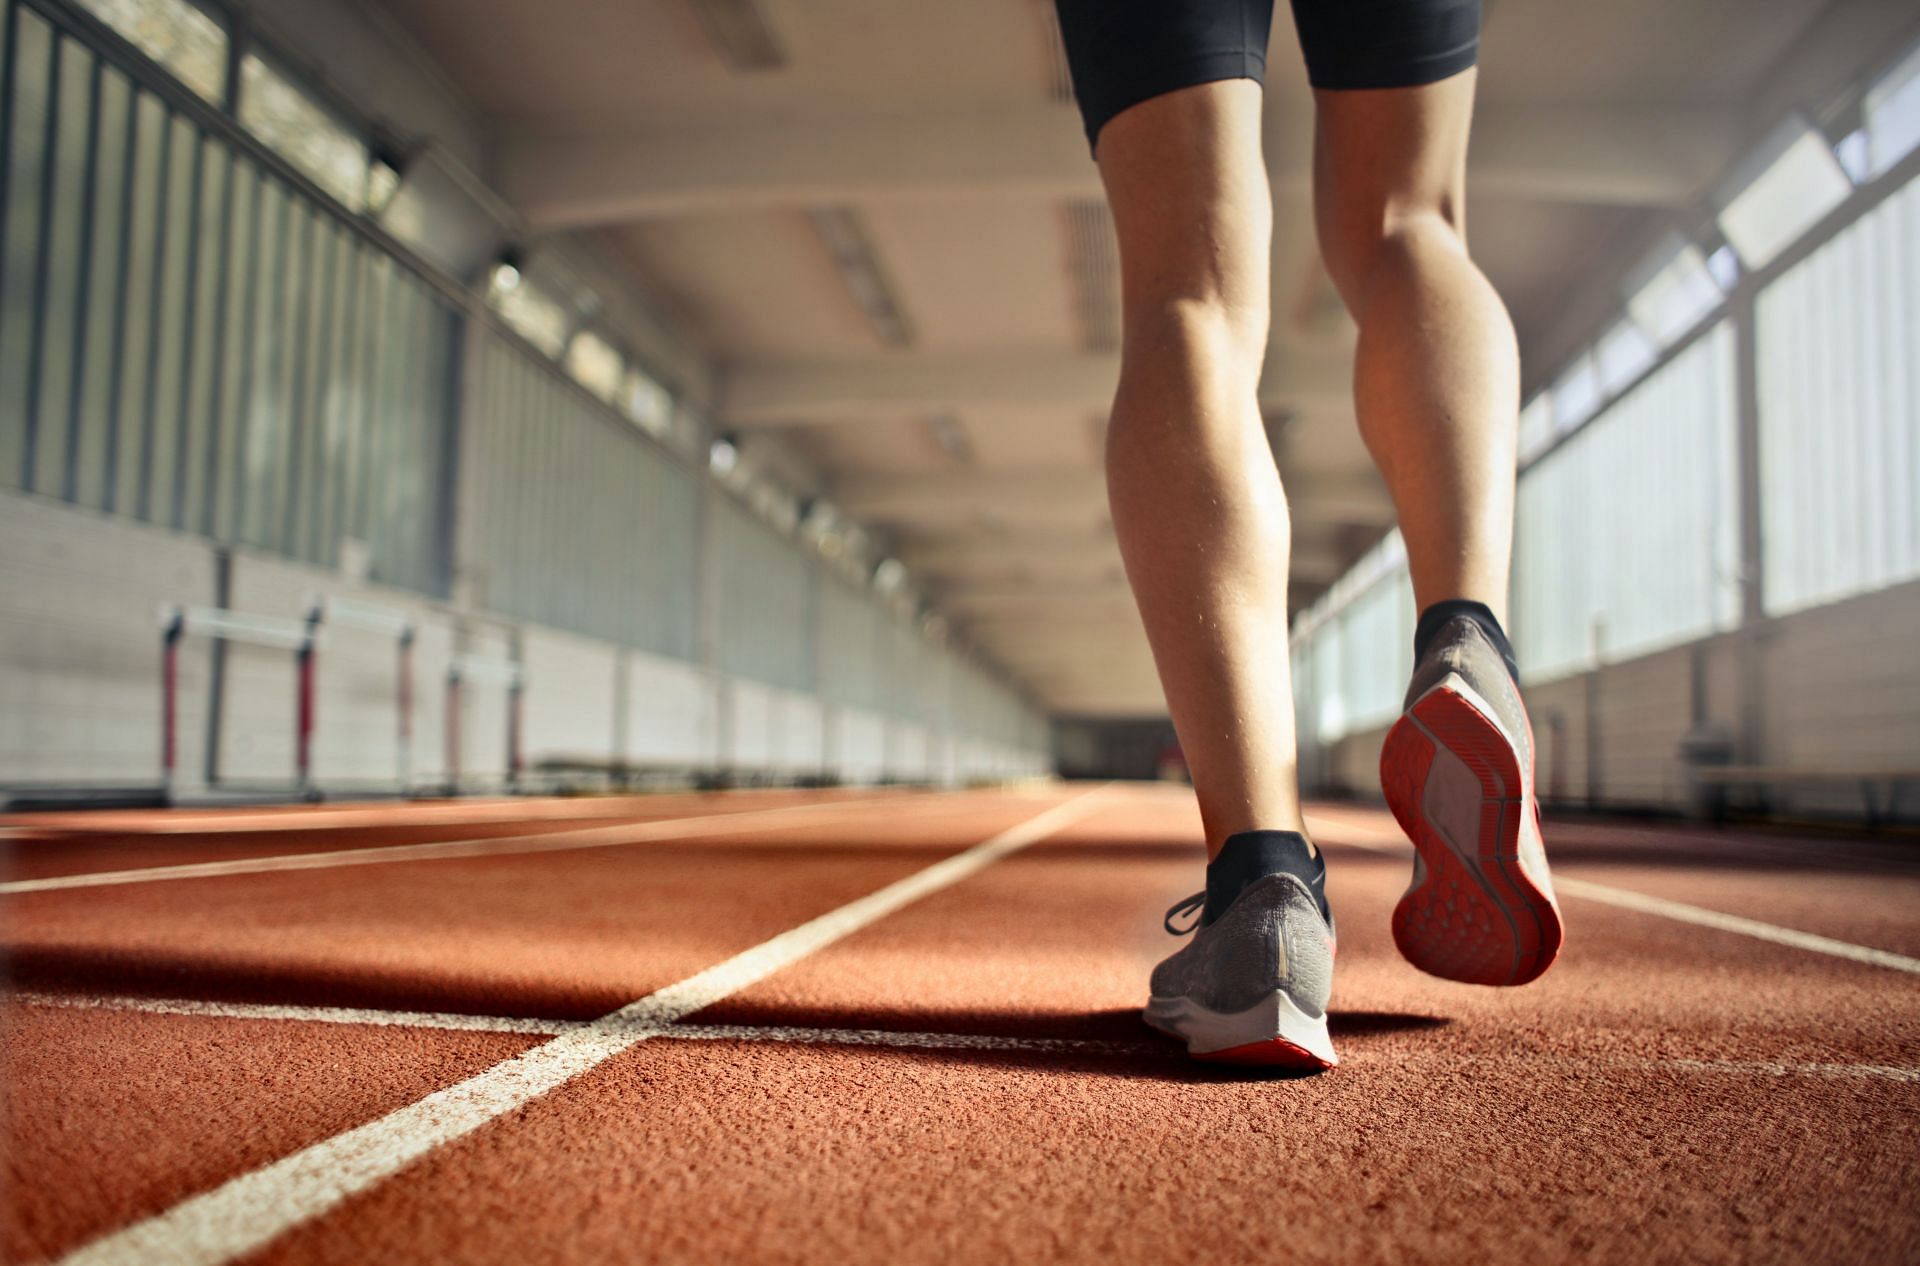 carbon-plated running shoes for better energy (image sourced via Pexels / Photo by Andrea)